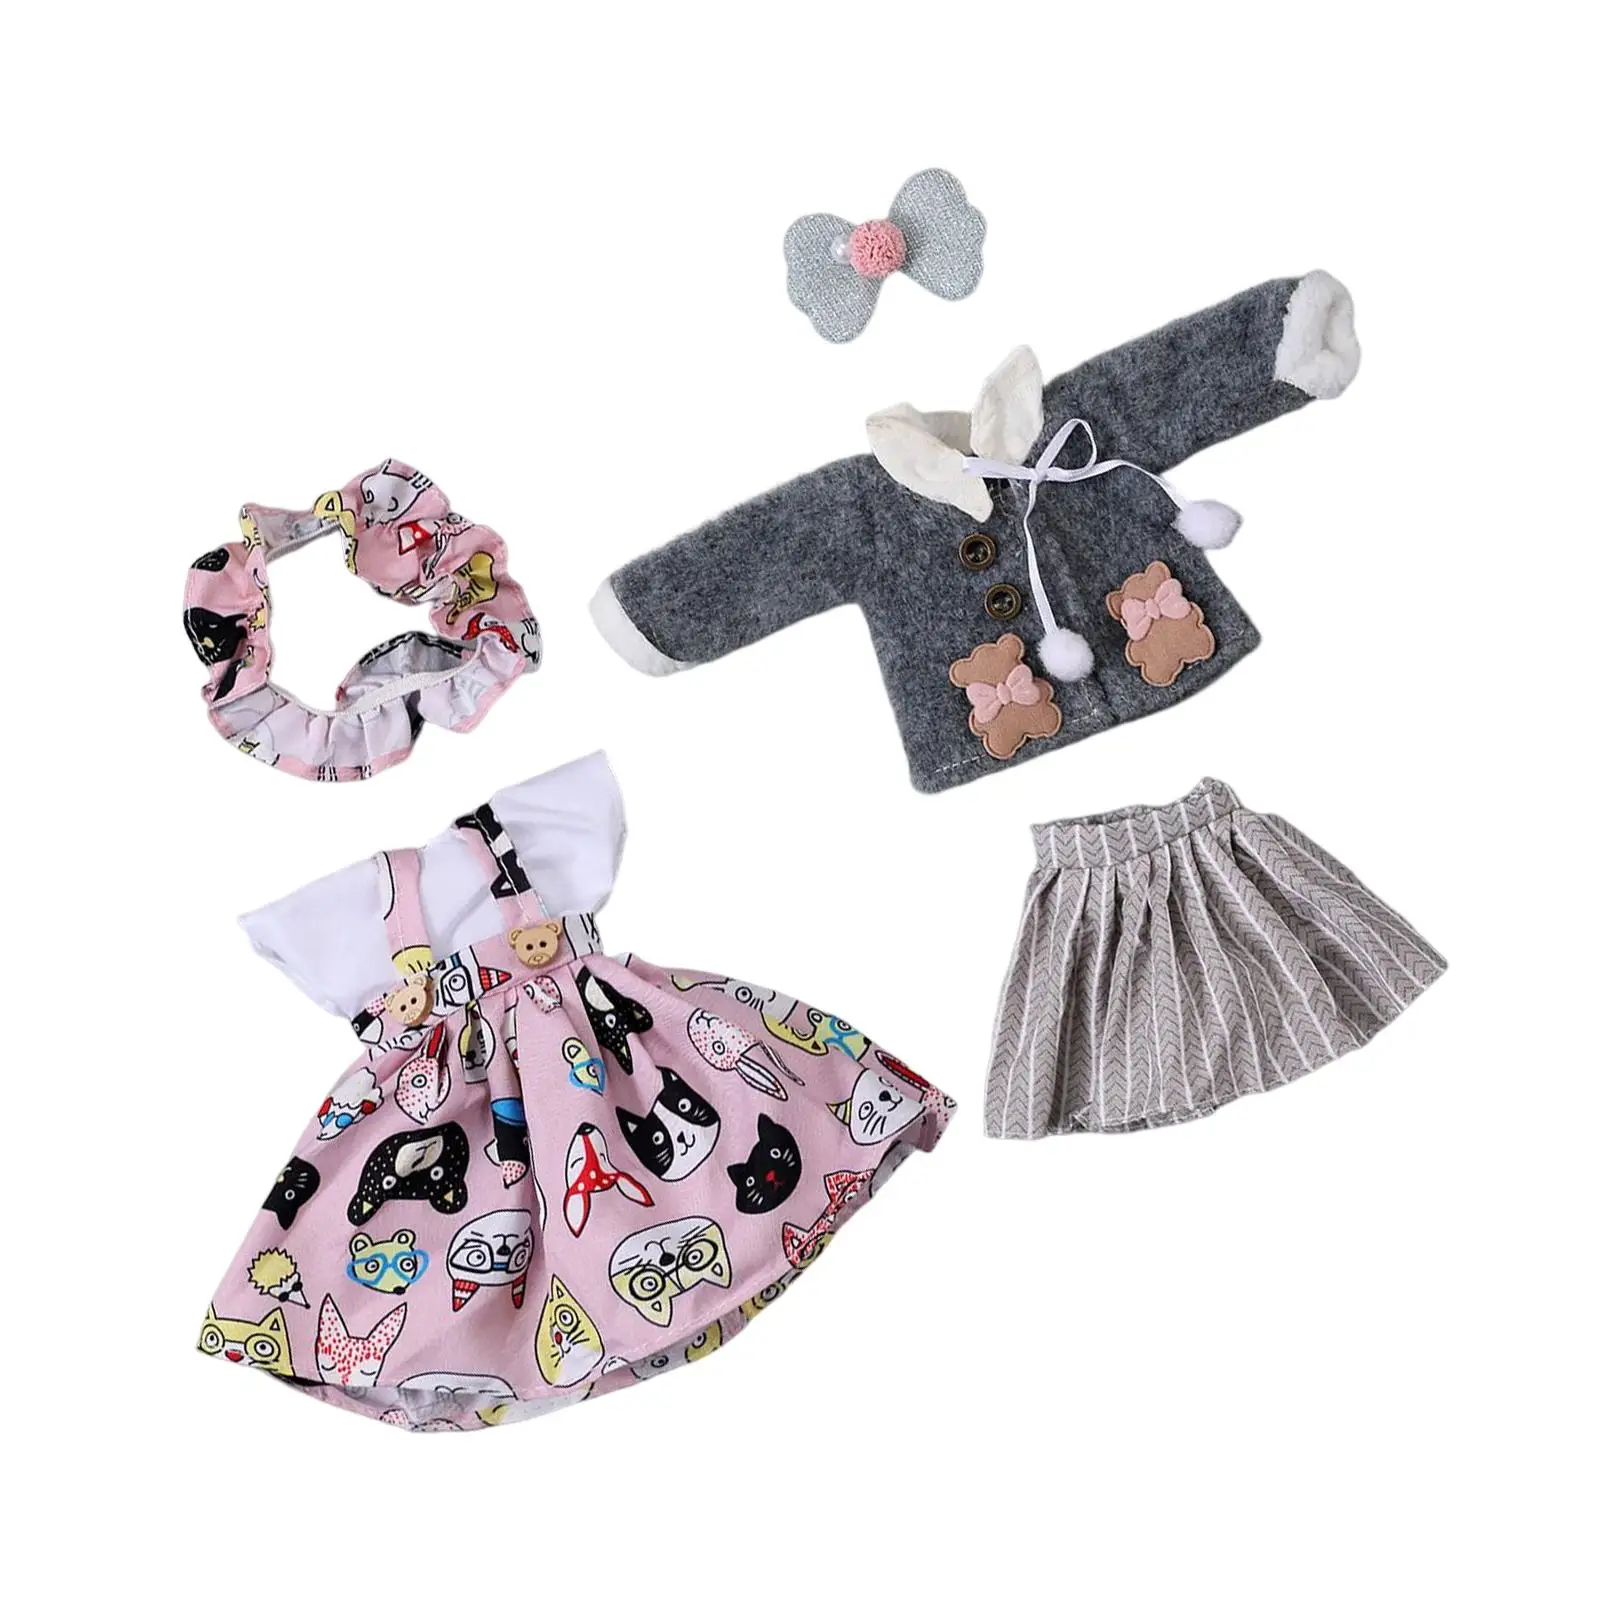 Doll Clothes Princess Dress Clothes Princess doll Clothes Accessories Sets for Game 1/6 Fashion Doll Birthday Gift